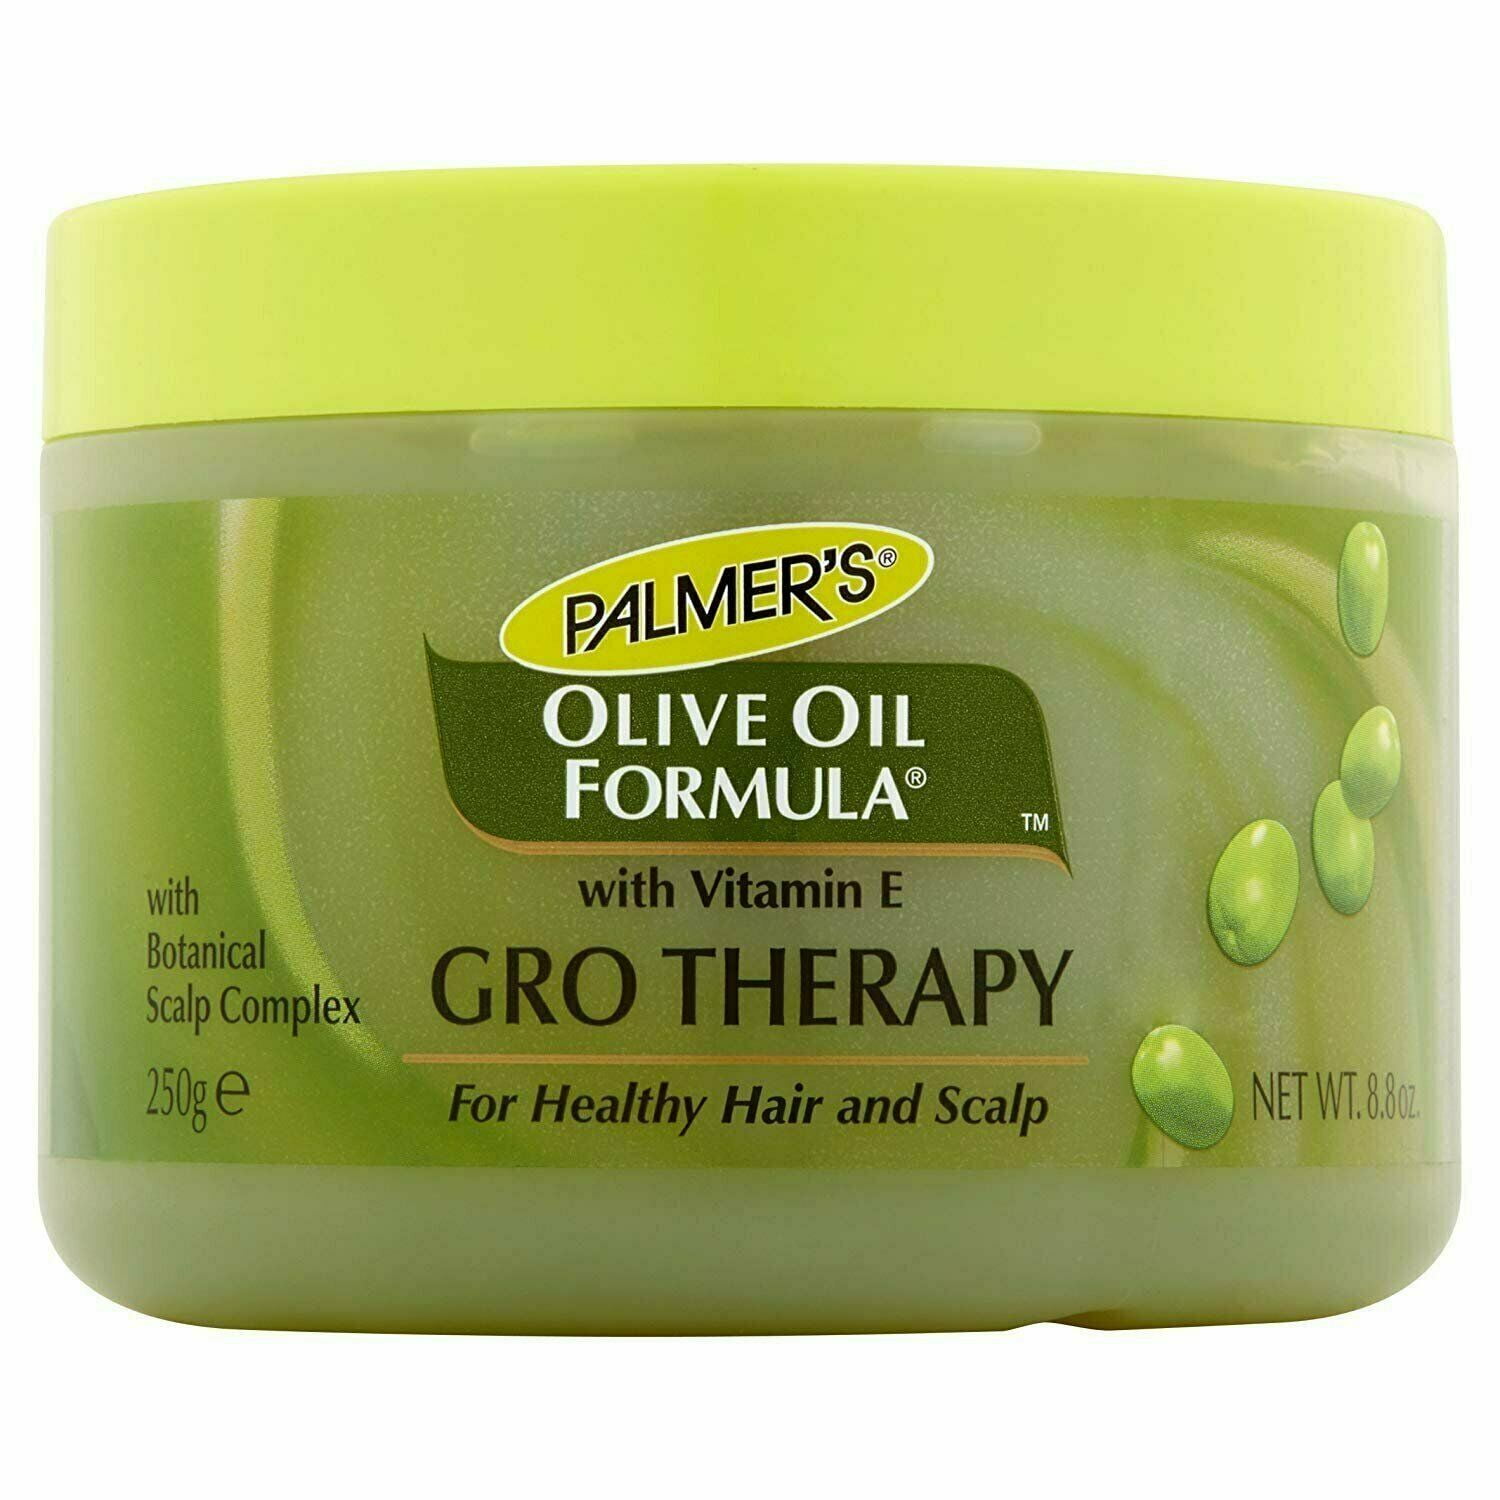 4th Ave Market: Palmer's Olive Oil Formula Gro Therapy